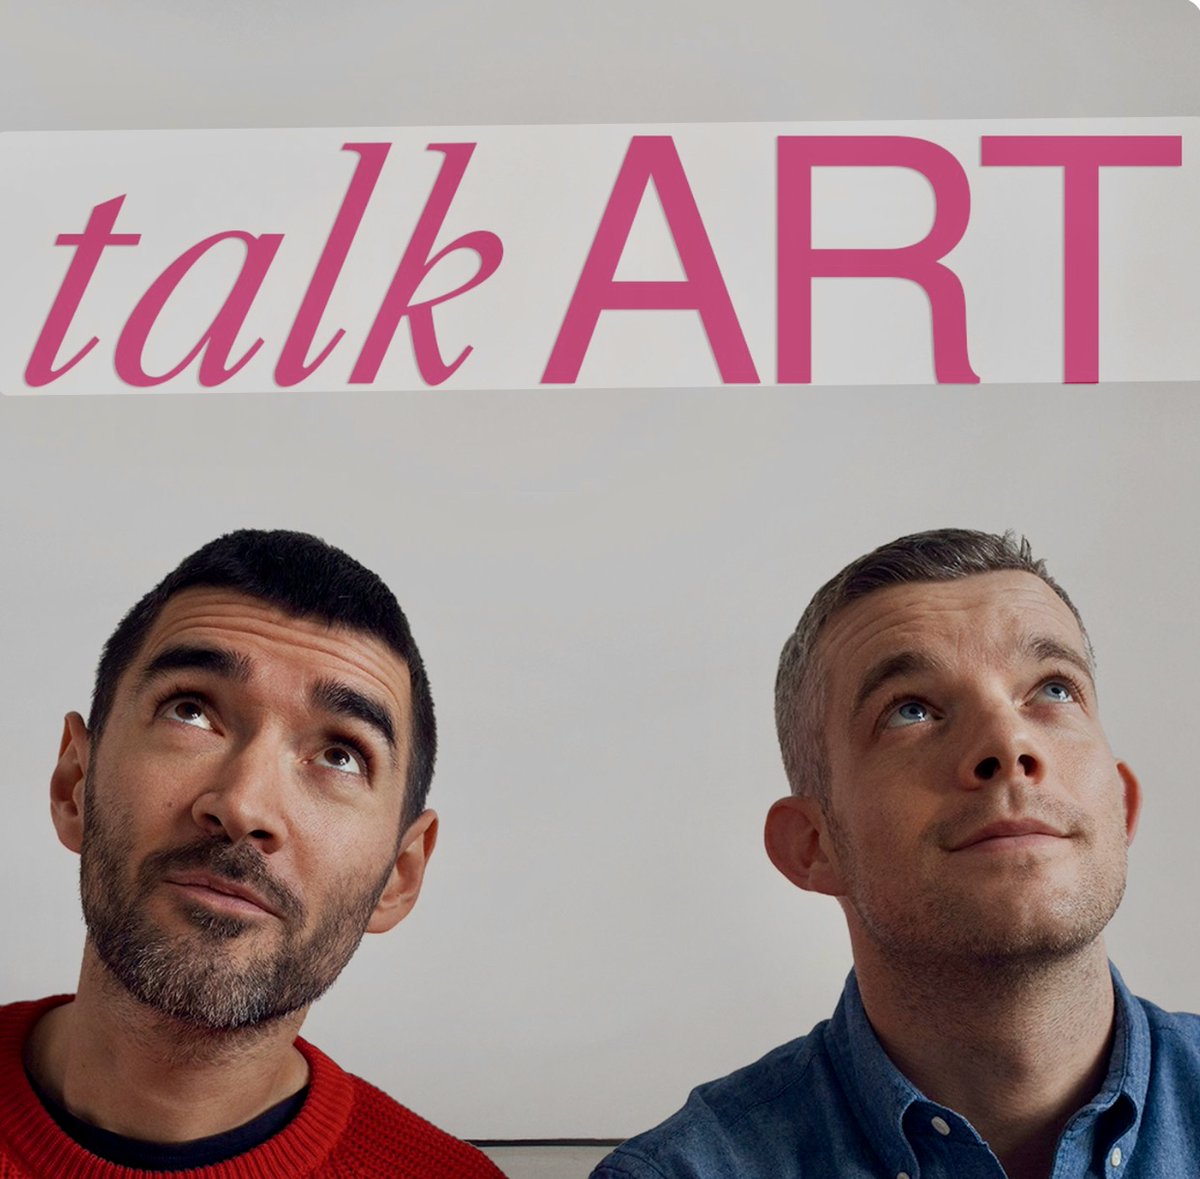 Neil and Chris discuss creating their new album in an interview with @russelltovey and @RobertDiament on the @Talkart podcast, which can be listened to now. podcasts.apple.com/gb/podcast/tal… #PetText